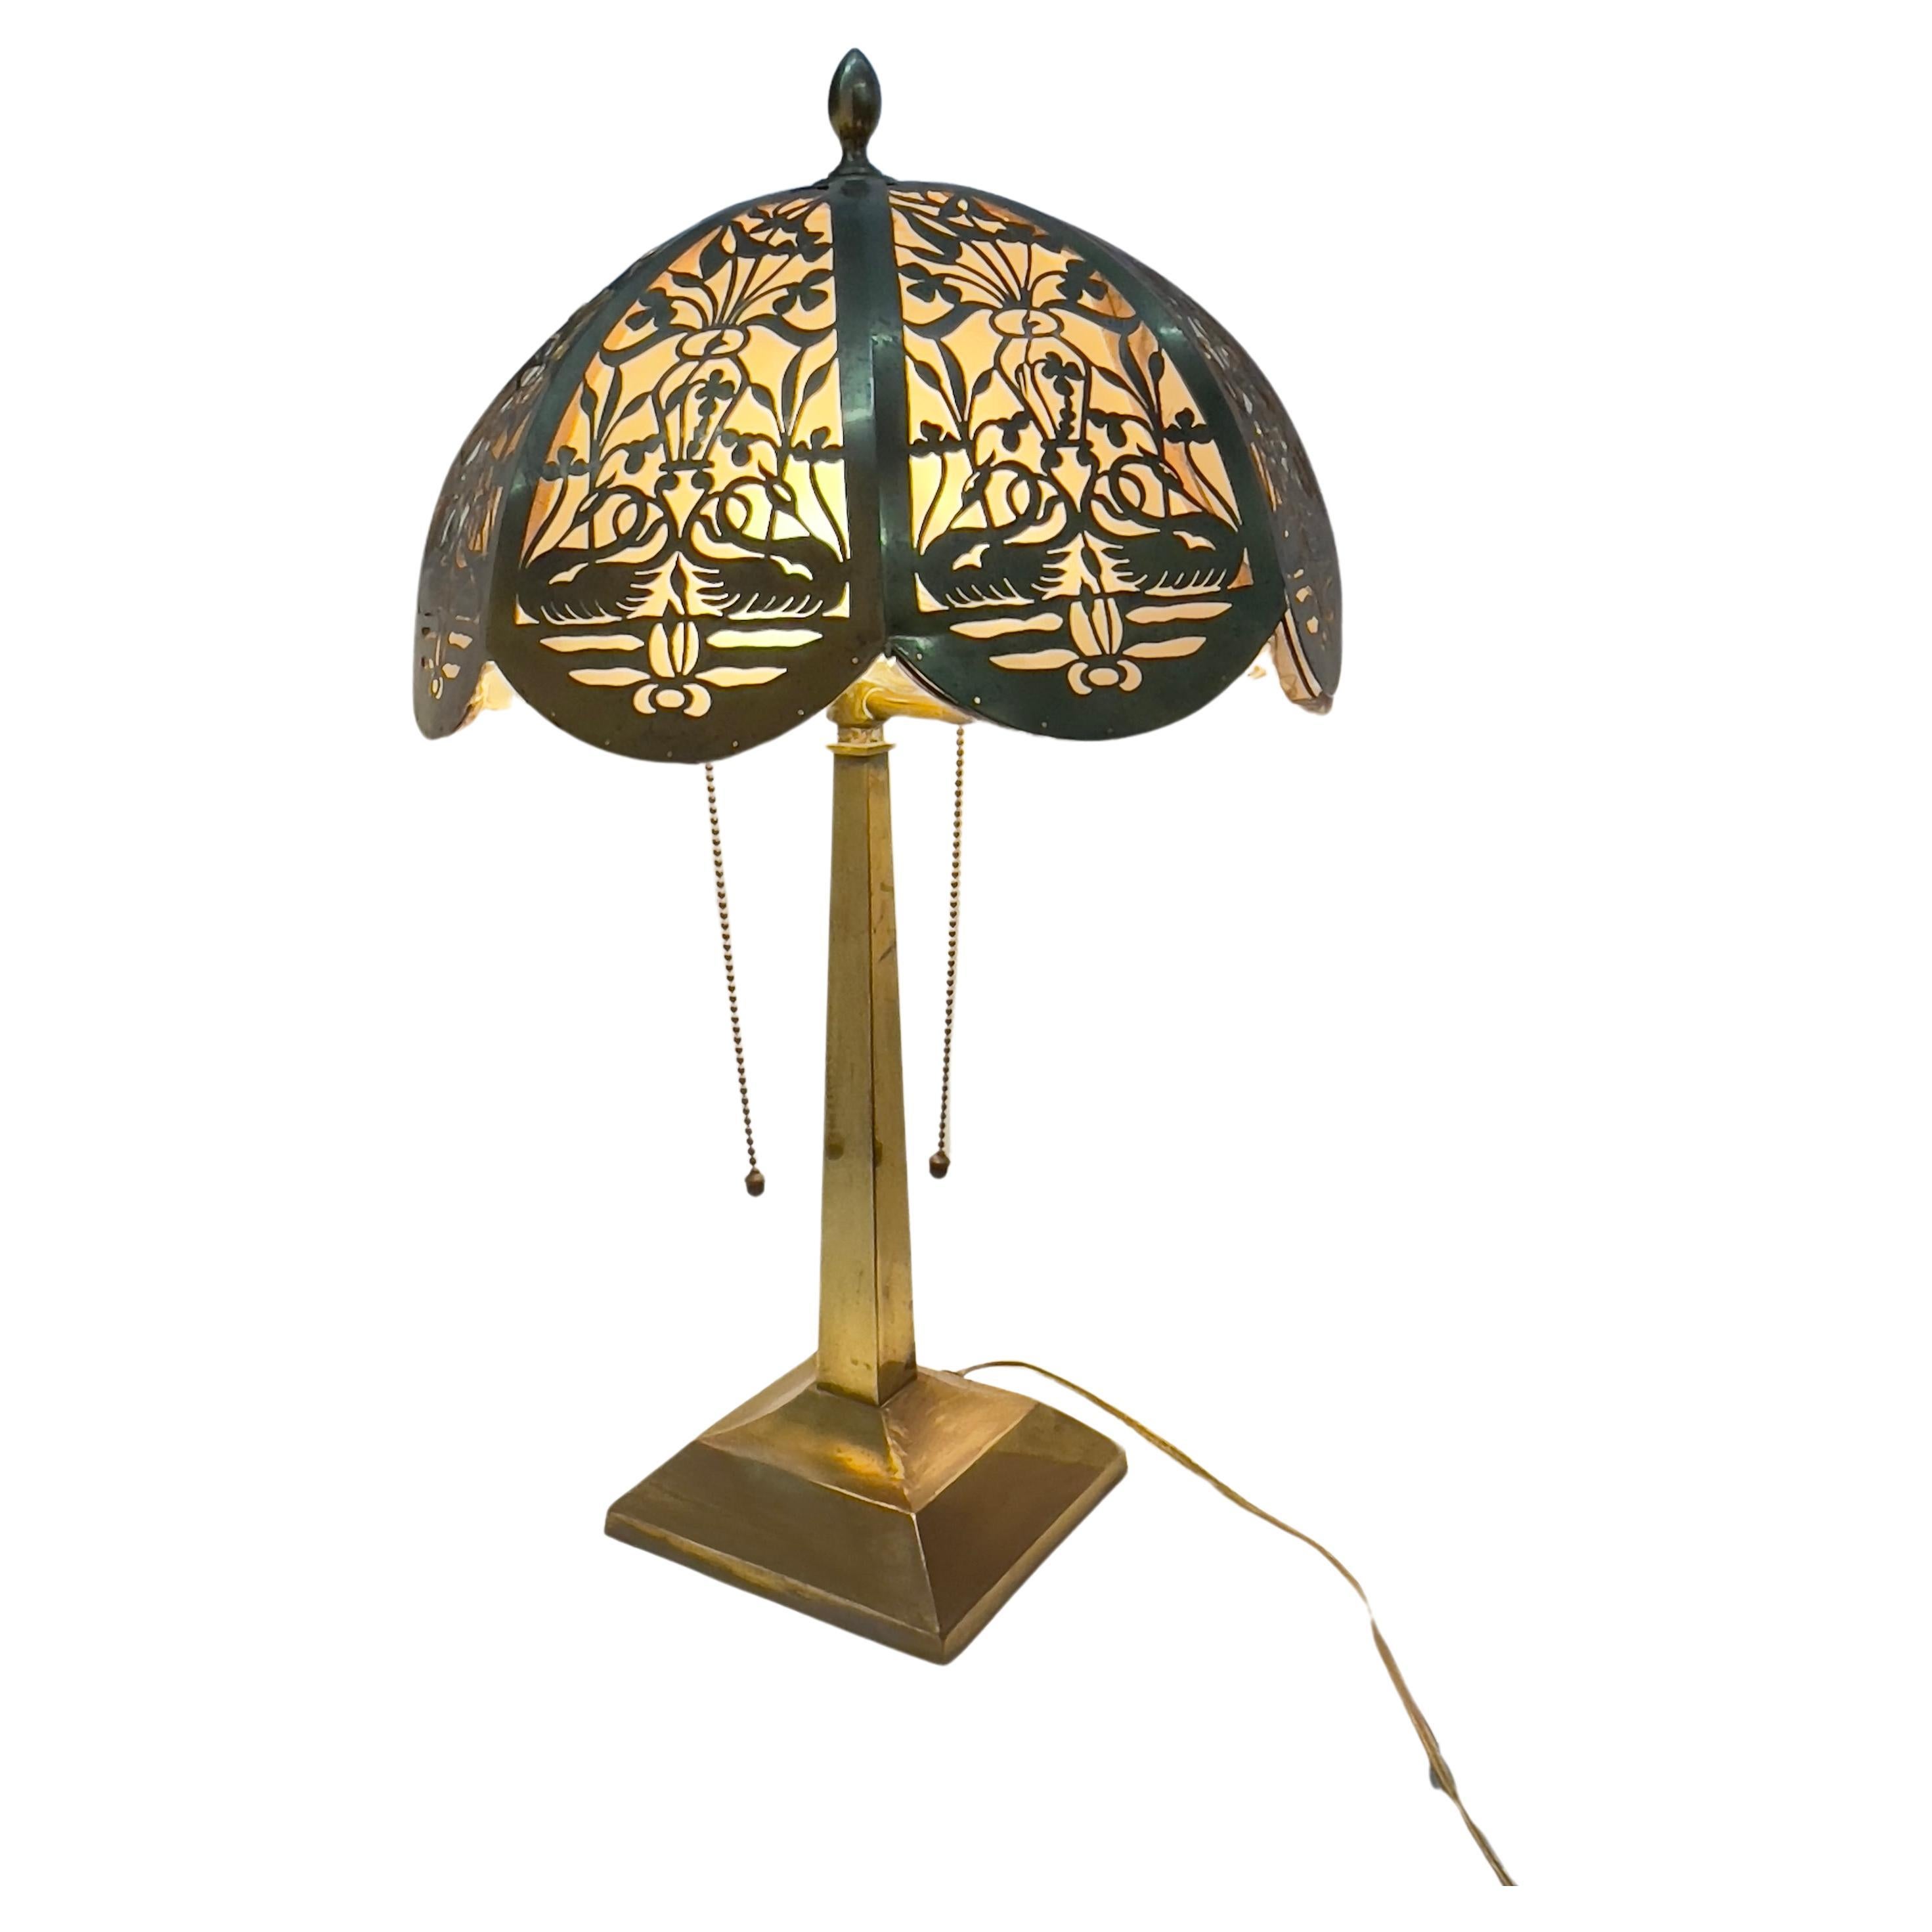 Circa 1920s Antique Brass Lamp With Reticulated Brass Lampshade For Sale